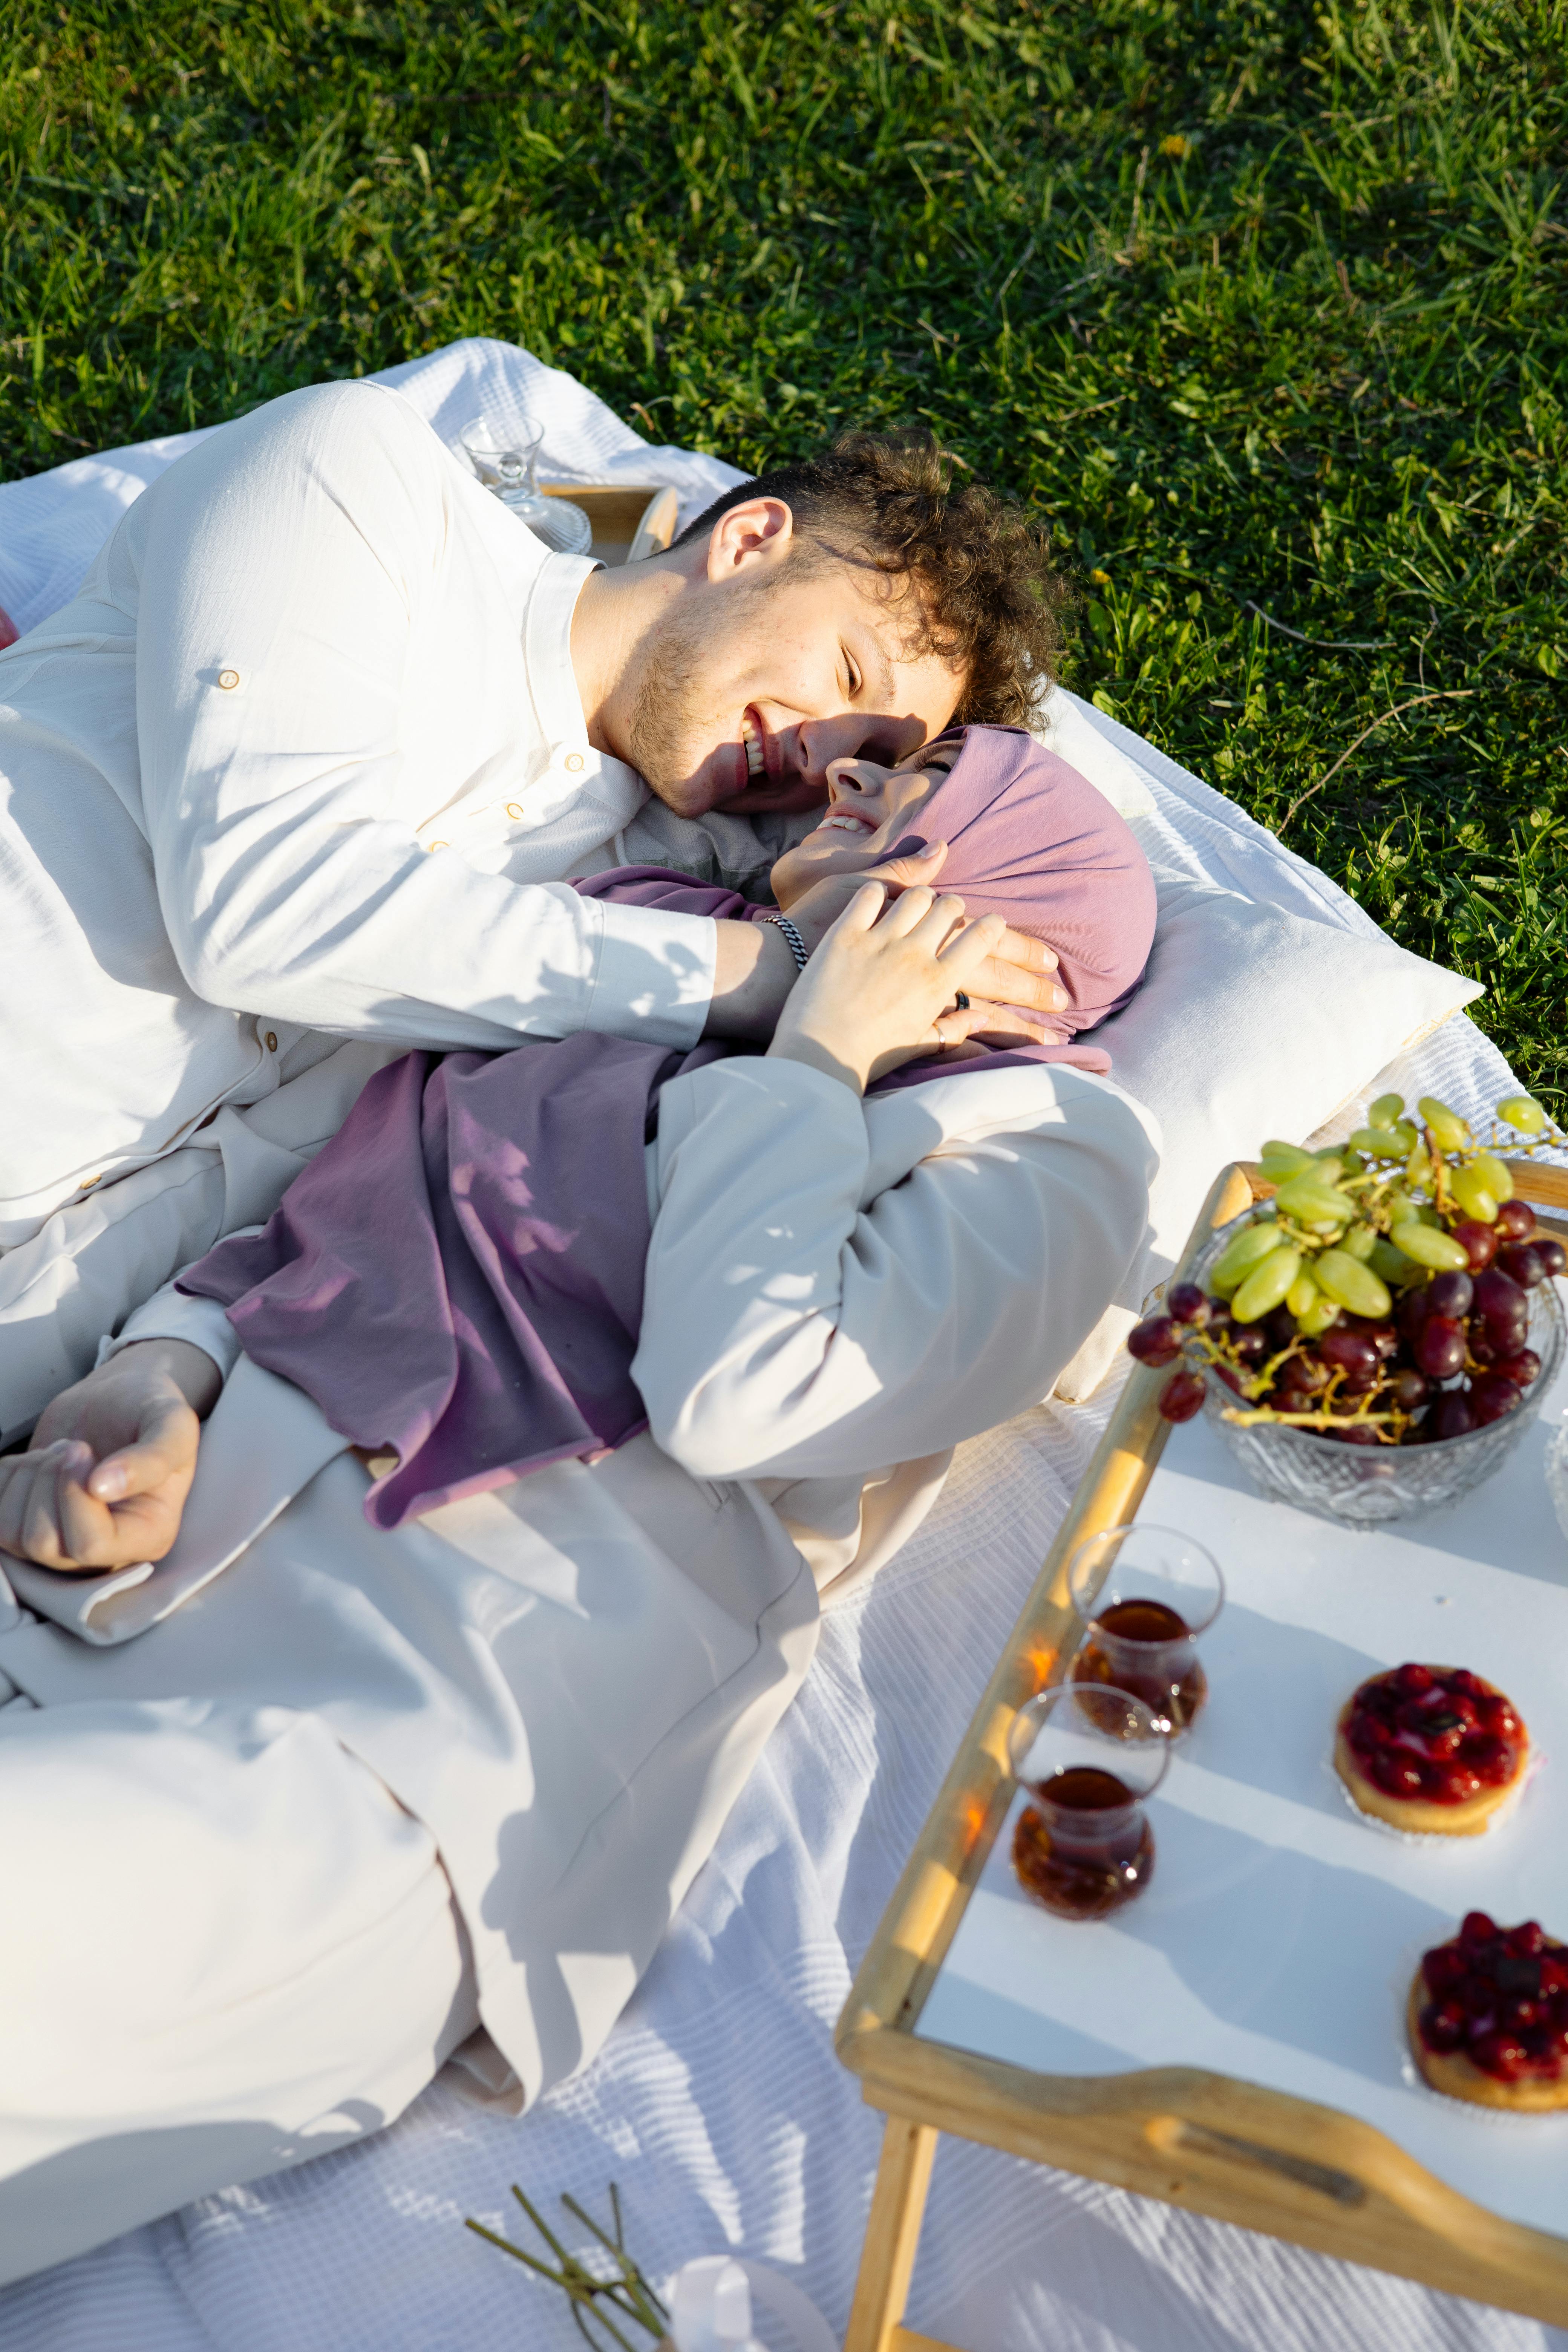 A couple having a romantic moment while lying down with drinks and grapes beside them | Source: Pexels